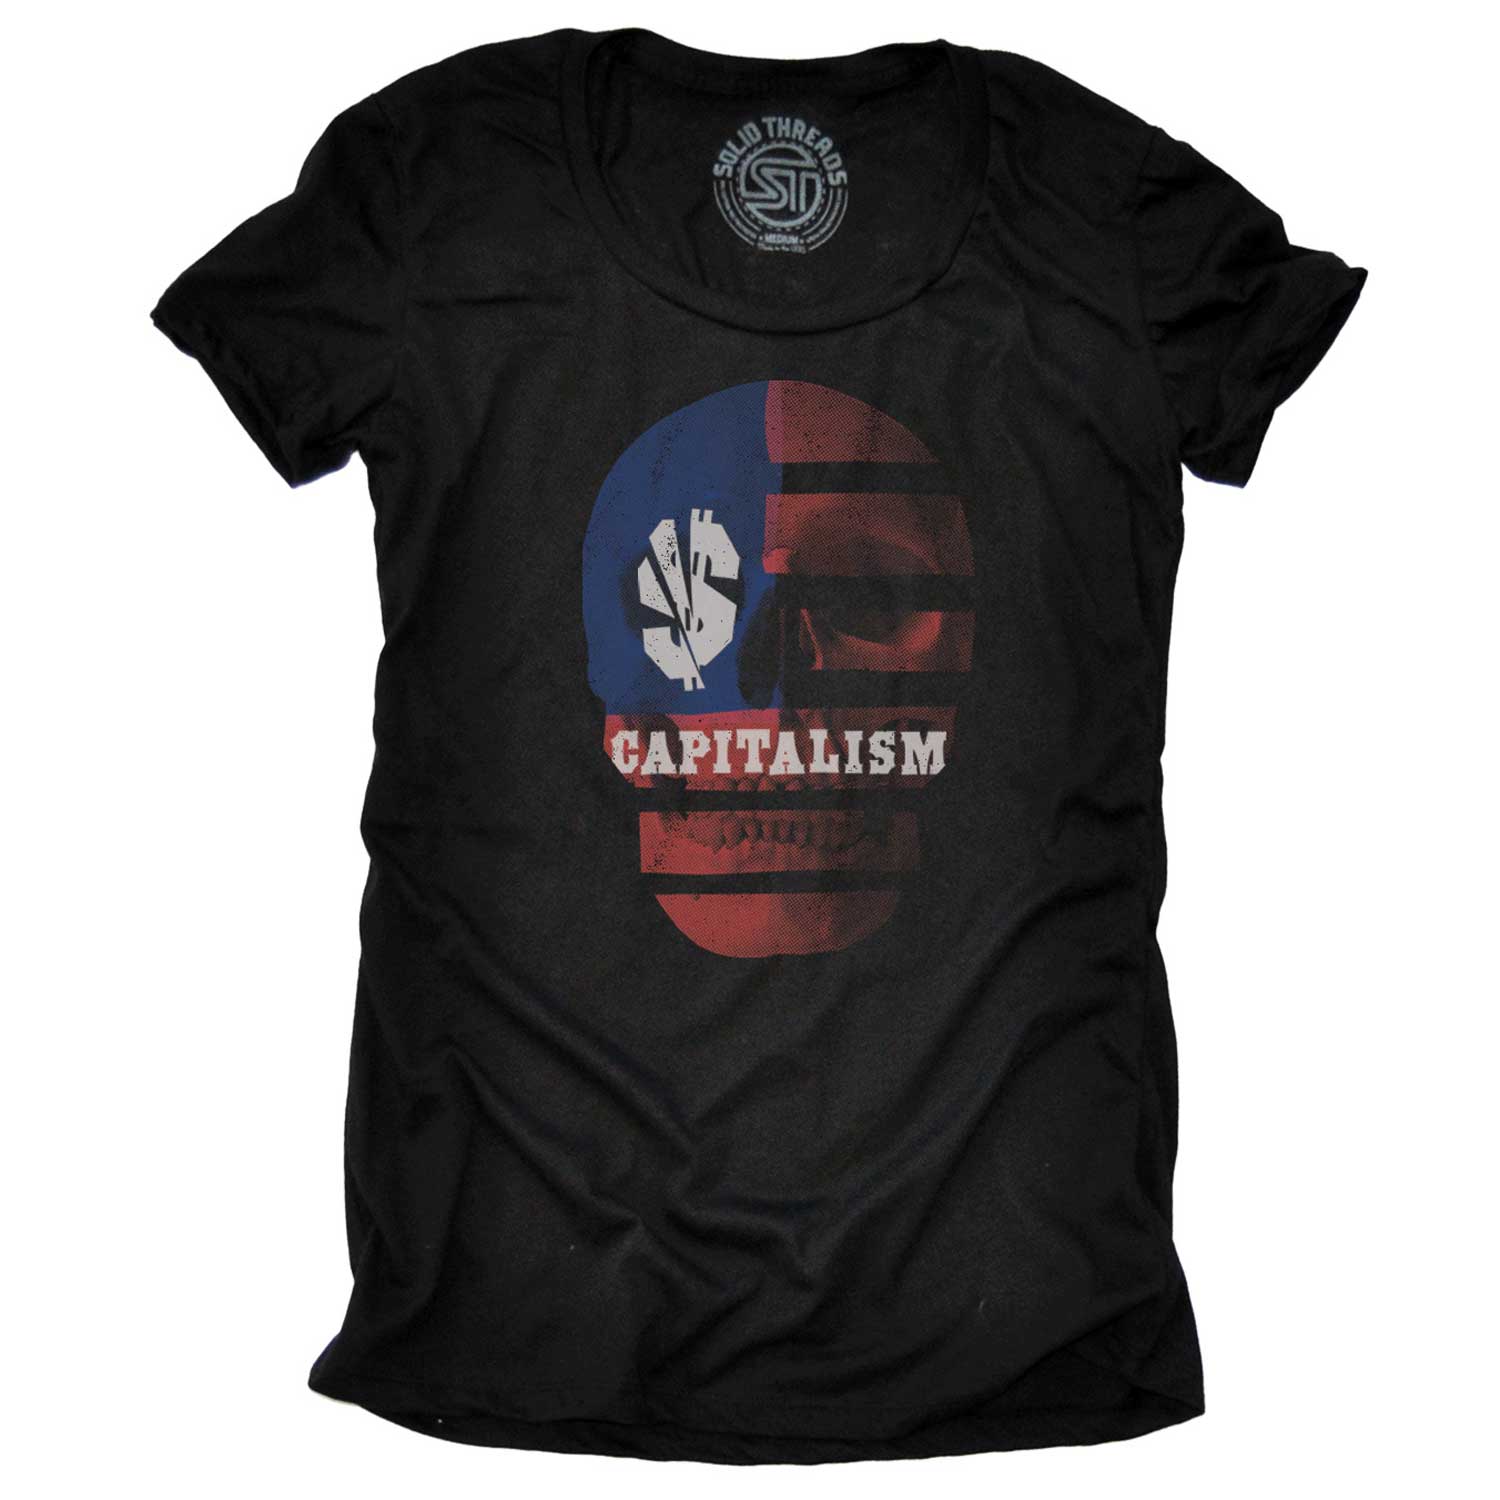 Women's Capitalism Skull Vintage Inspired T-shirt | Cool Income Equality Graphic Tee | Solid Threads